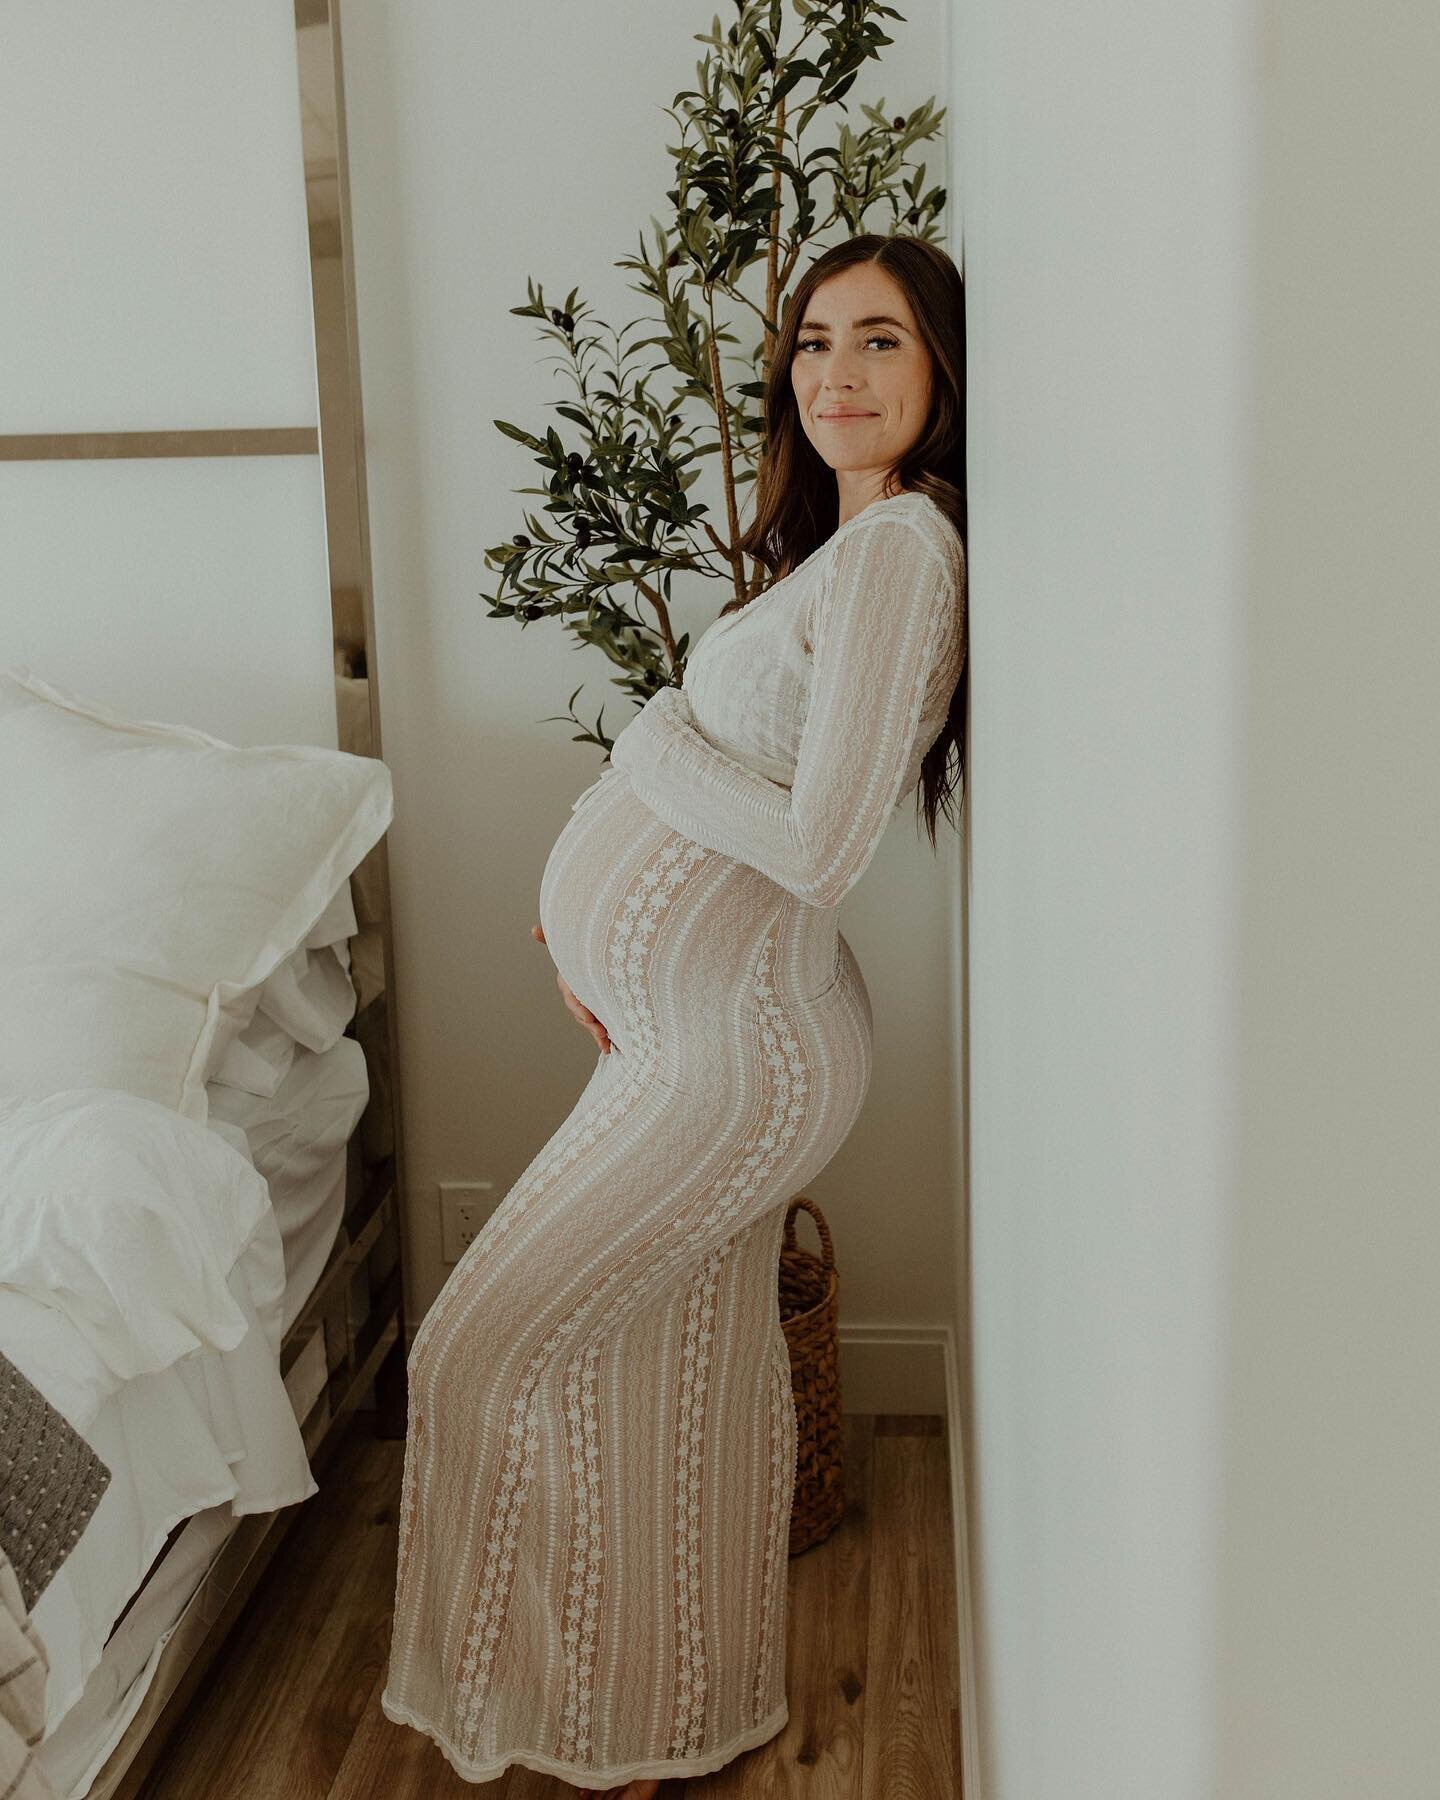 Baby month for @brekyntay and I cannot wait to be at this birth! She&rsquo;s got the bump I wish I had while pregnant. 😍 Hot mama!! 🔥

@thelightloftaz is so beautifully done and I&rsquo;m so thankful to have been able to do a session here! I can&rs